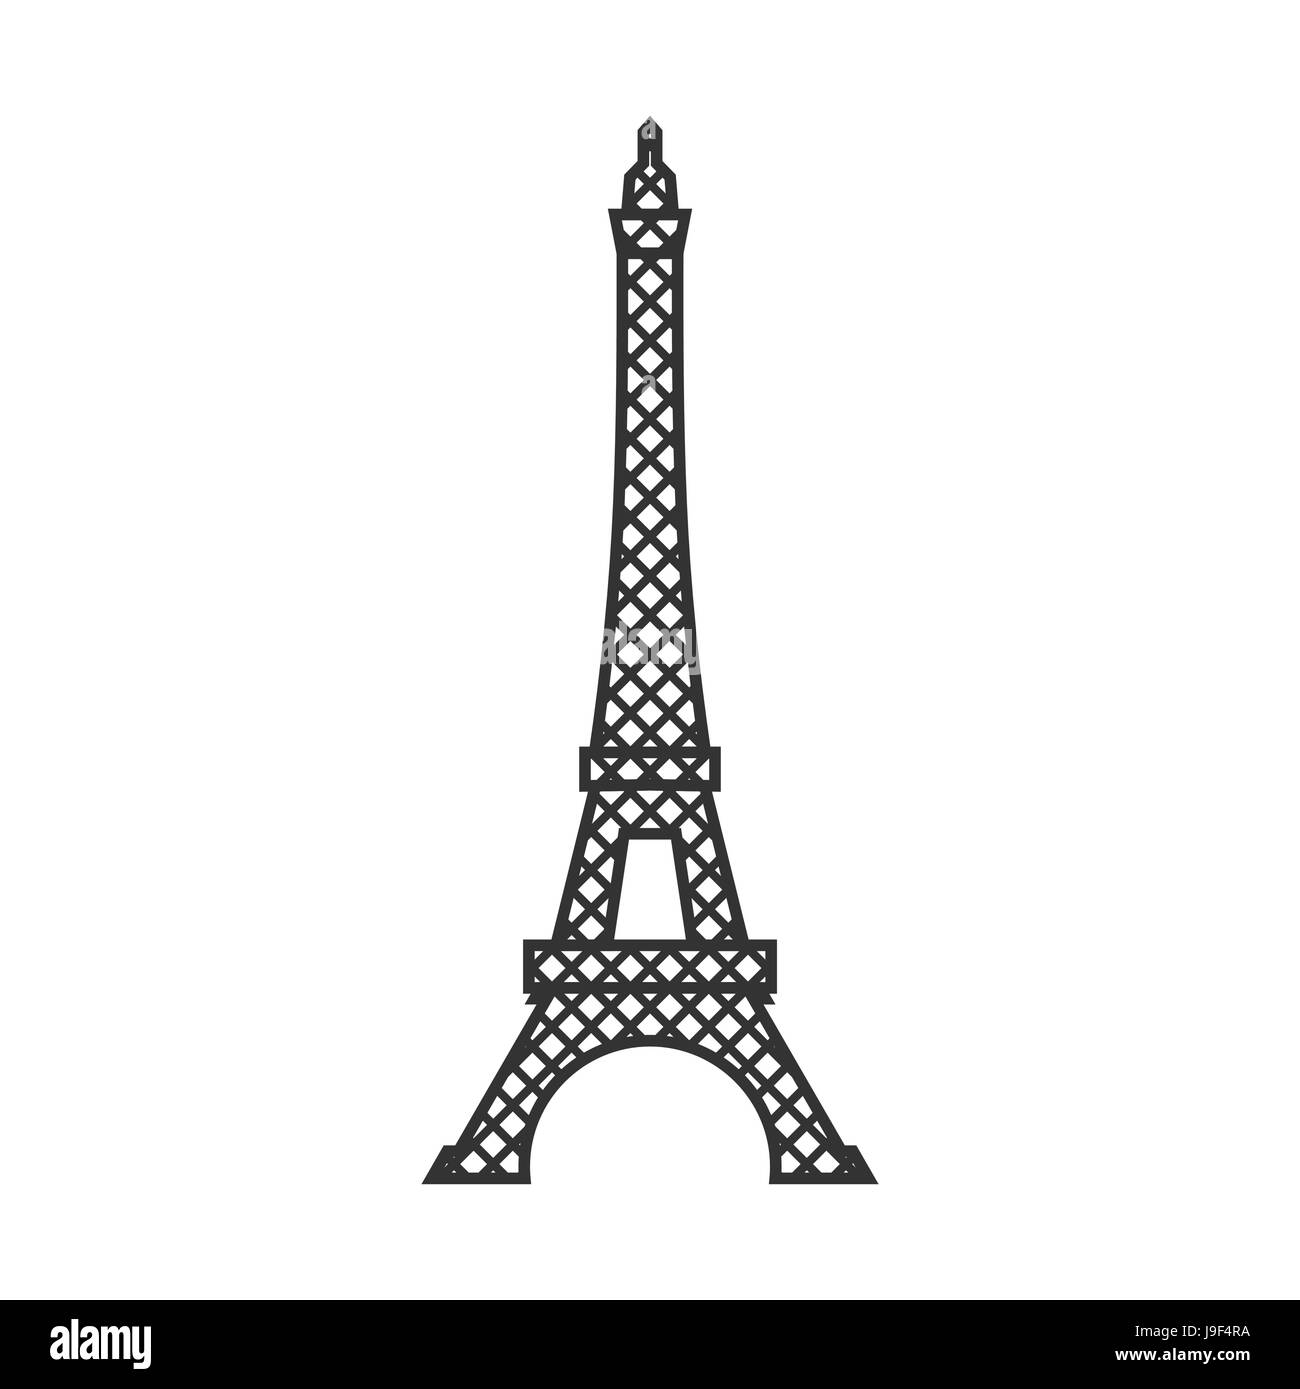 Eiffel tower isolated. Paris attractions. Landmark of France on white background Stock Vector